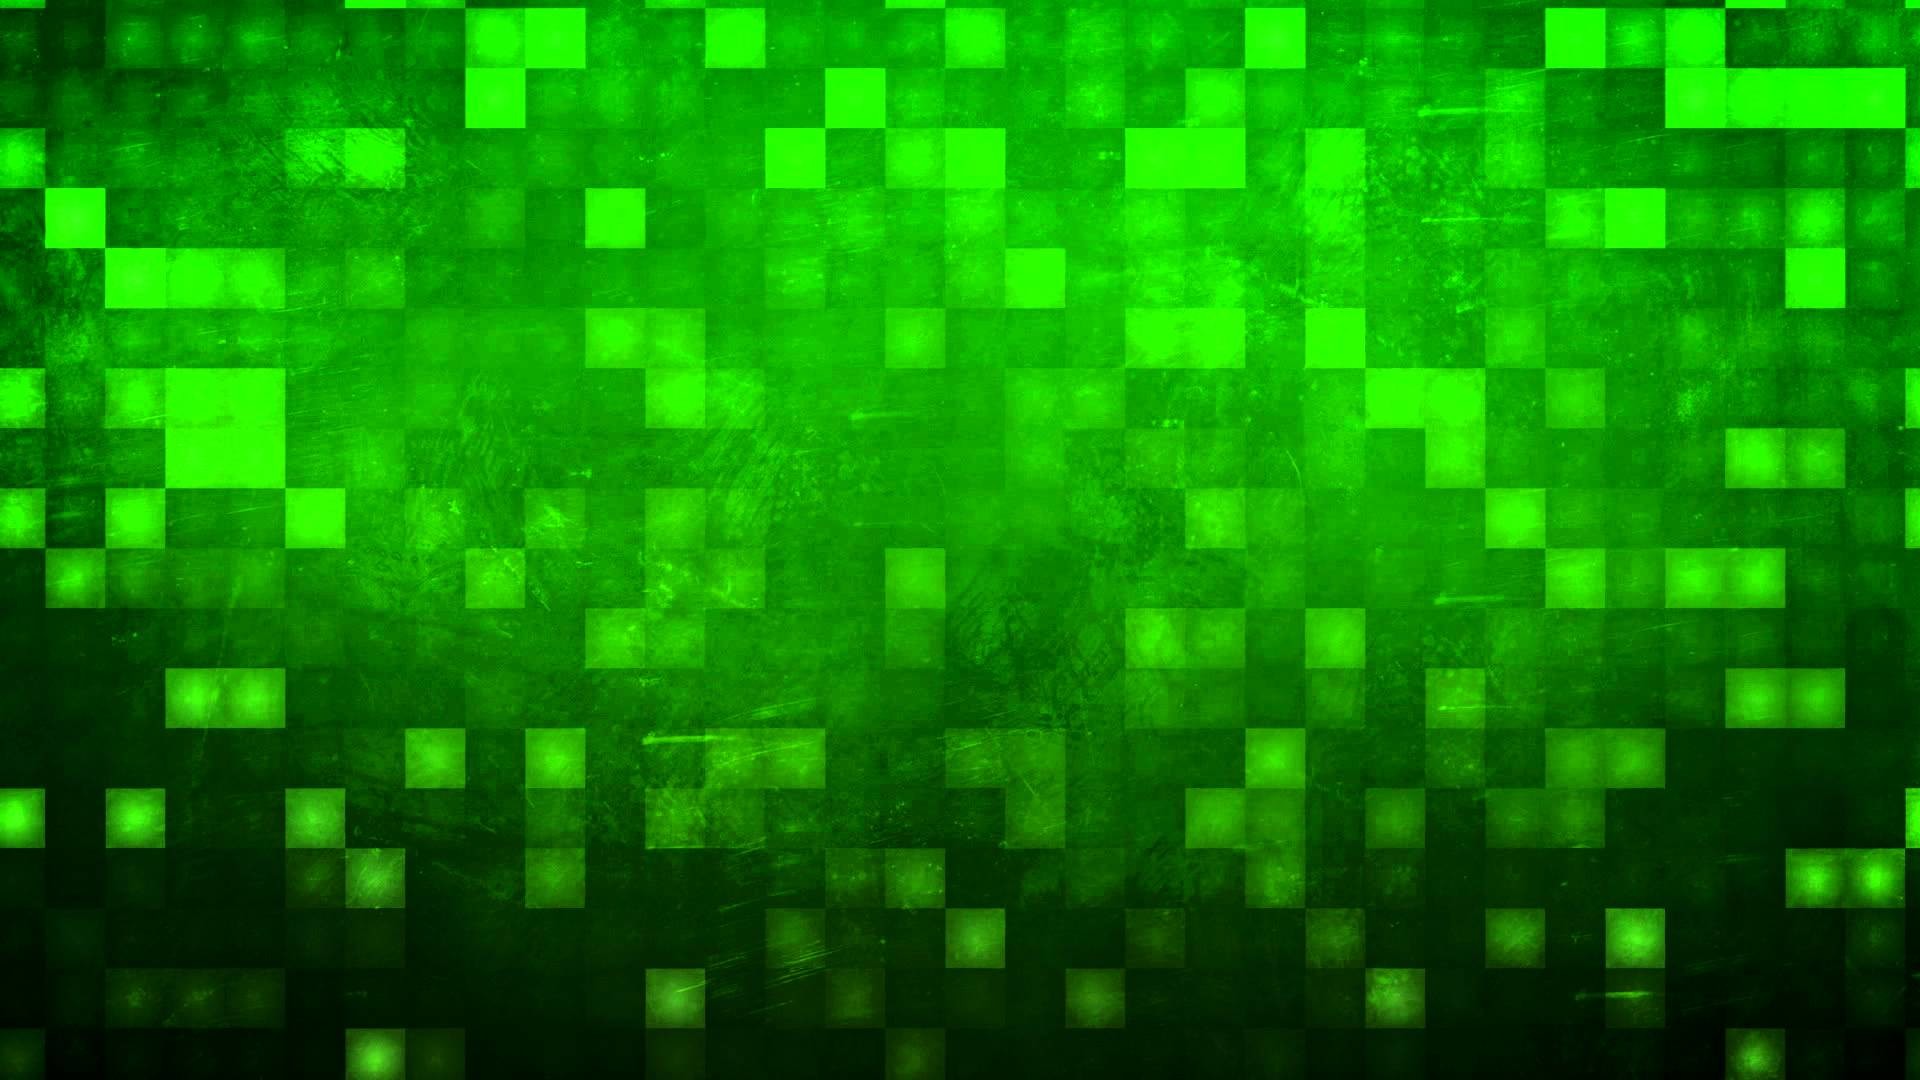 1920x1080 Photoshop Background Templates Epic Minecraft Backgrounds Wallpaper  